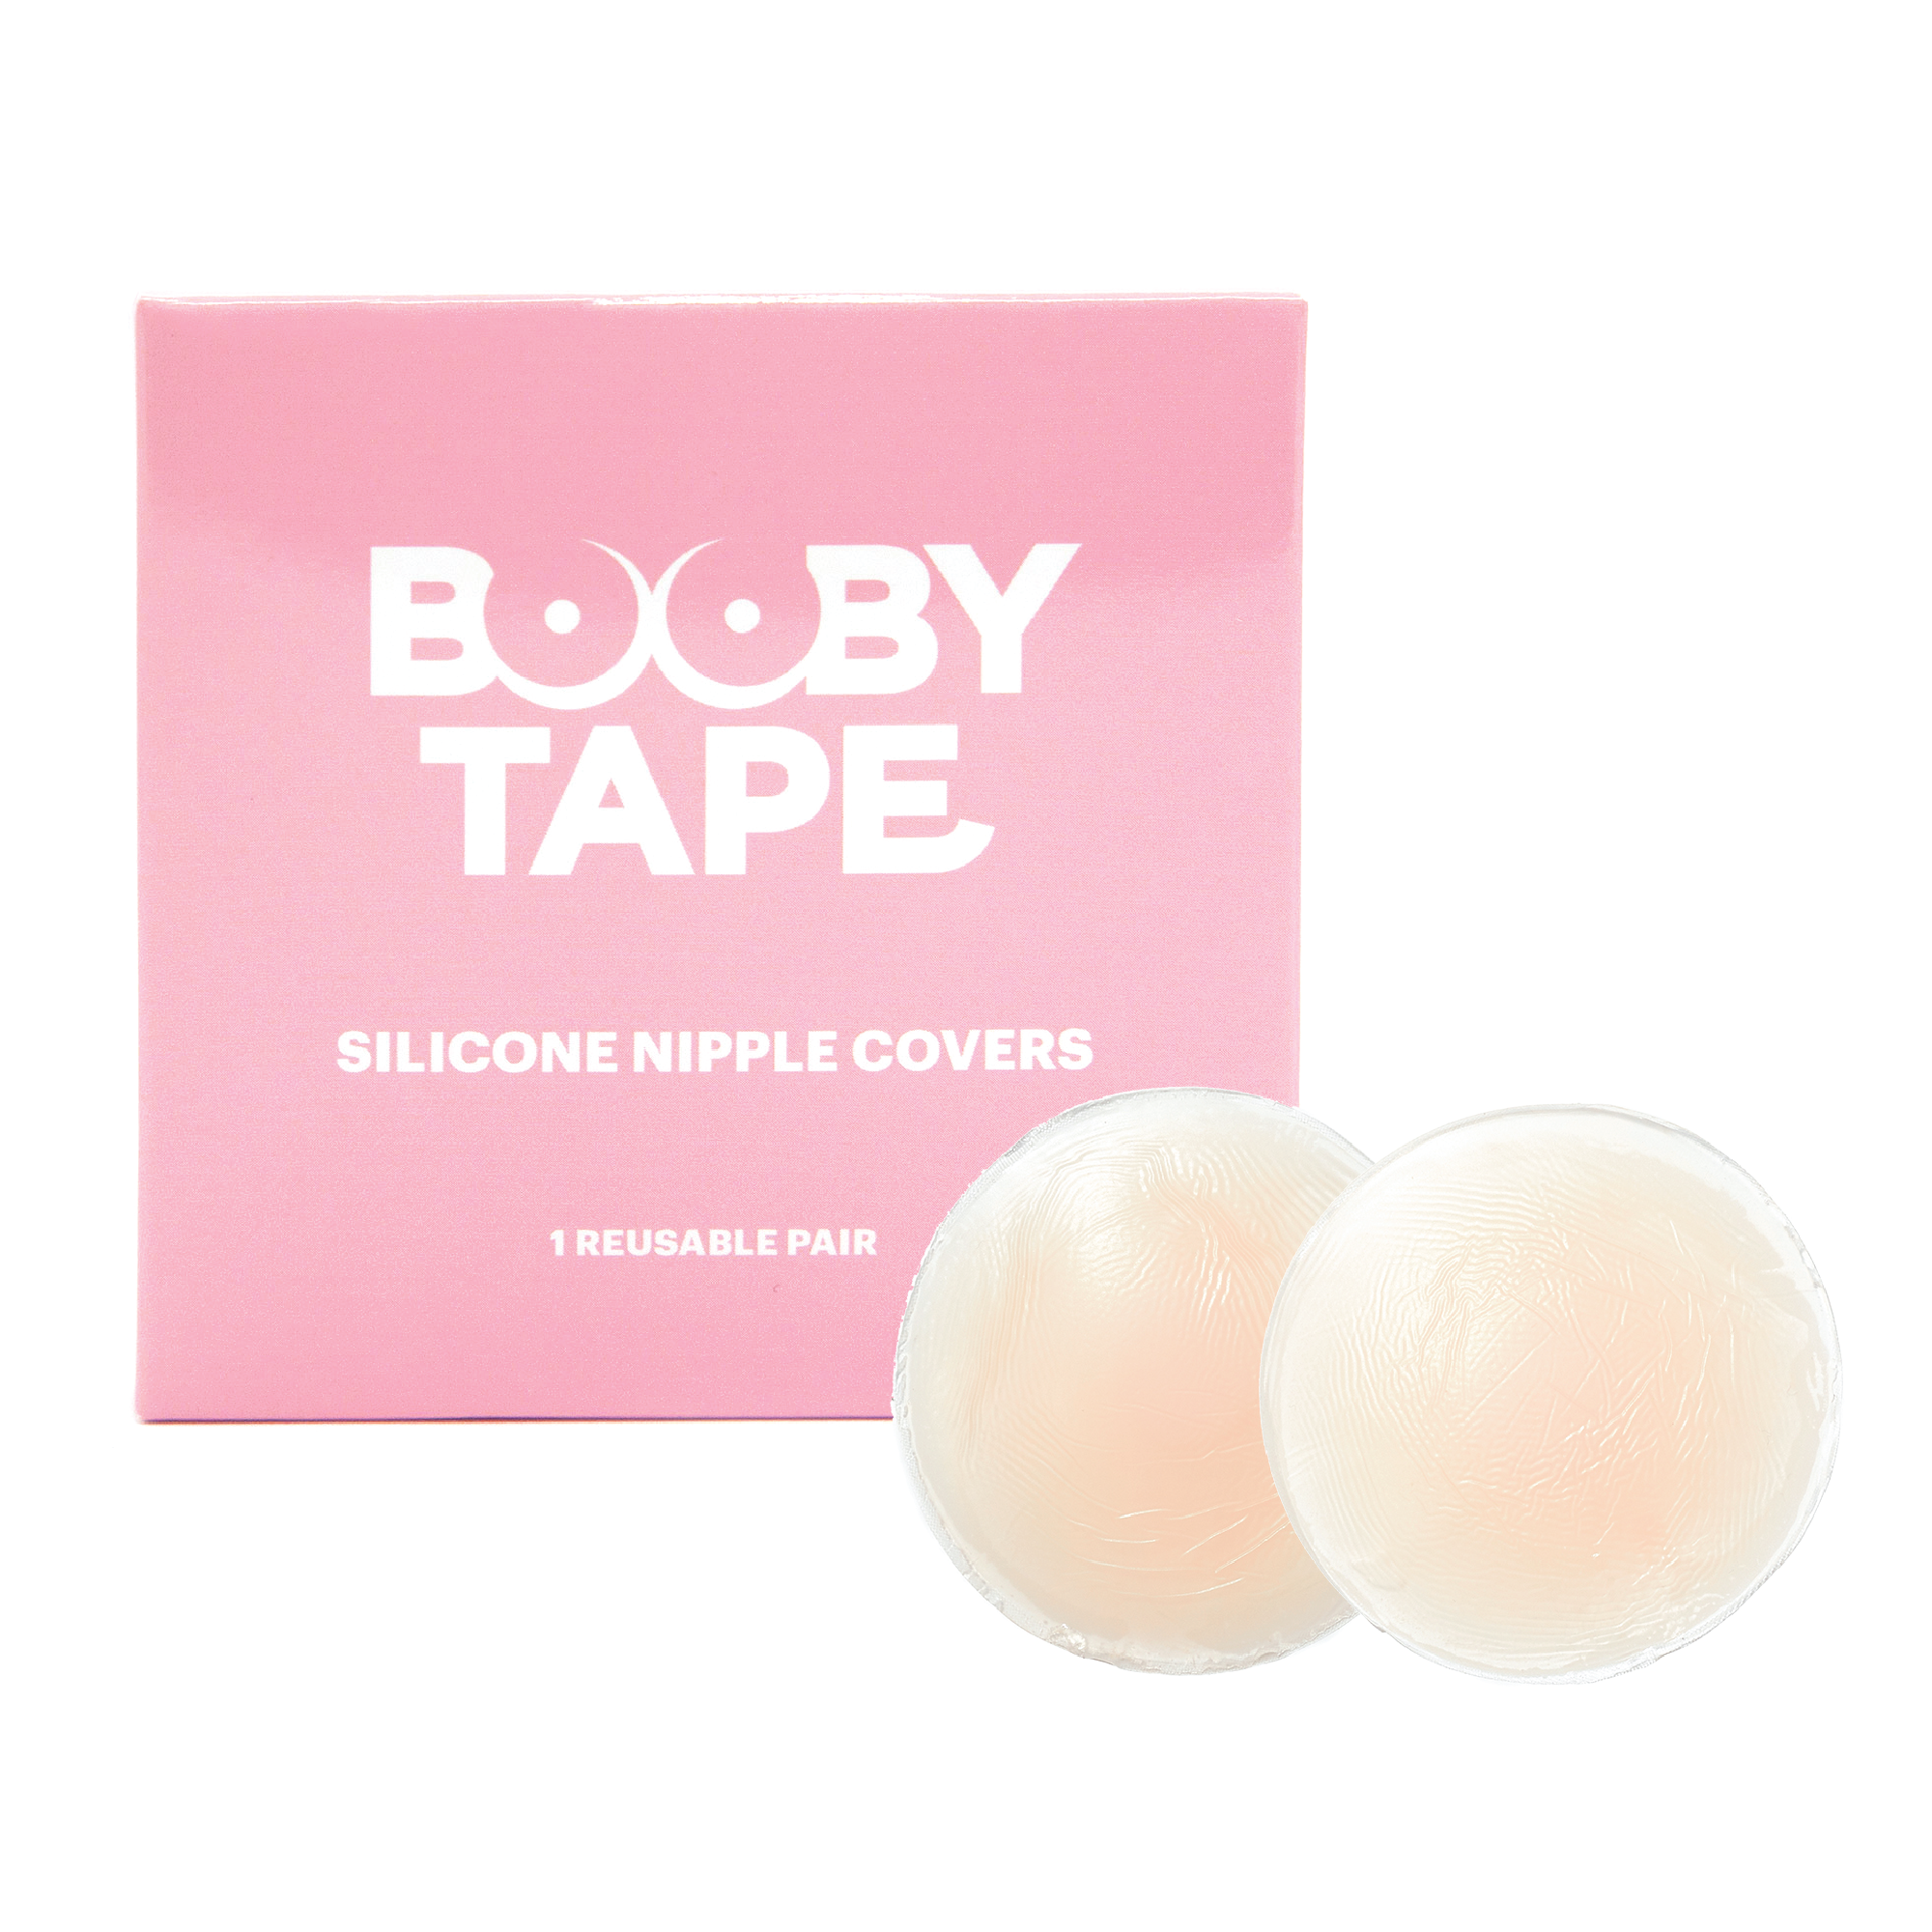 Booby Tape Silicone Nipple Covers, Reusable Adhesive Breast Petals